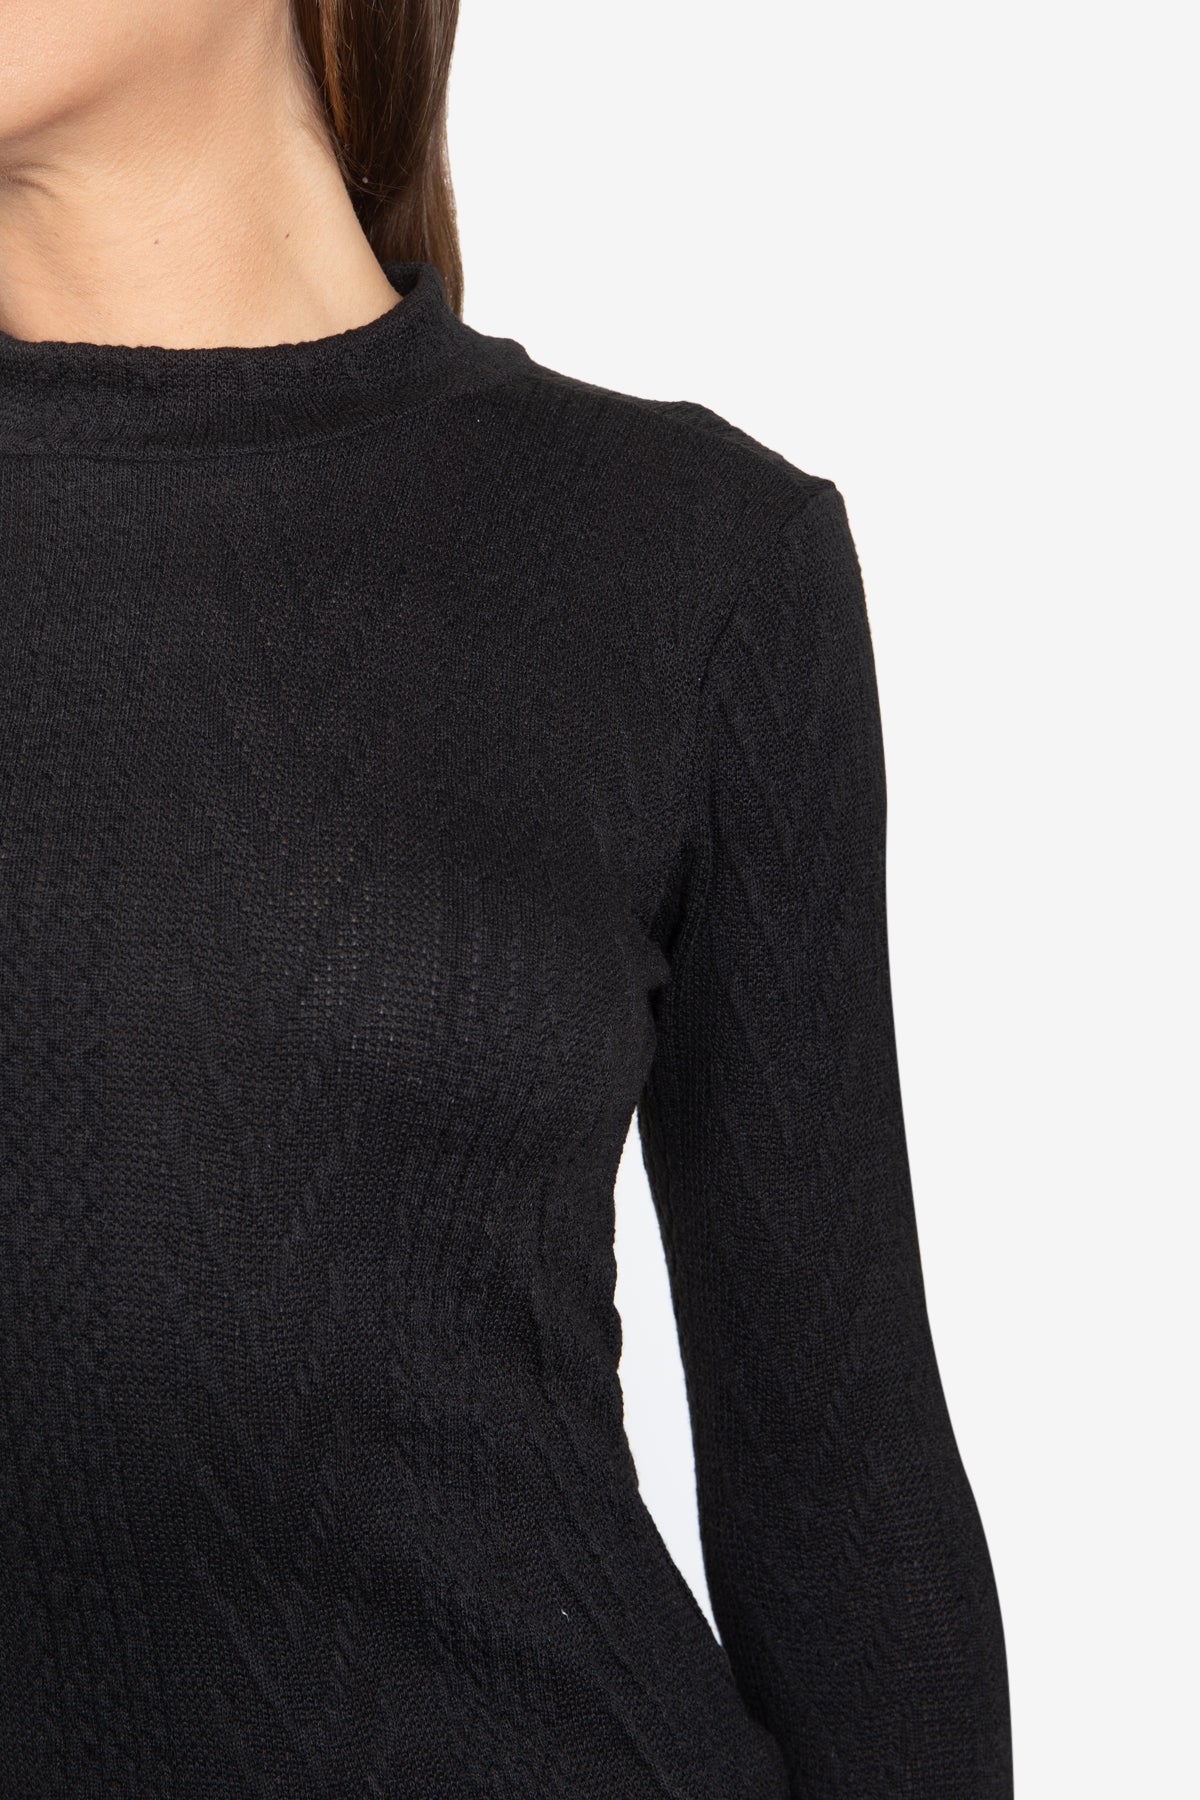 BLACK TURTLE NECK KNITTED CHEVERON PRINT KNITTED LONG SLEEVE TOP